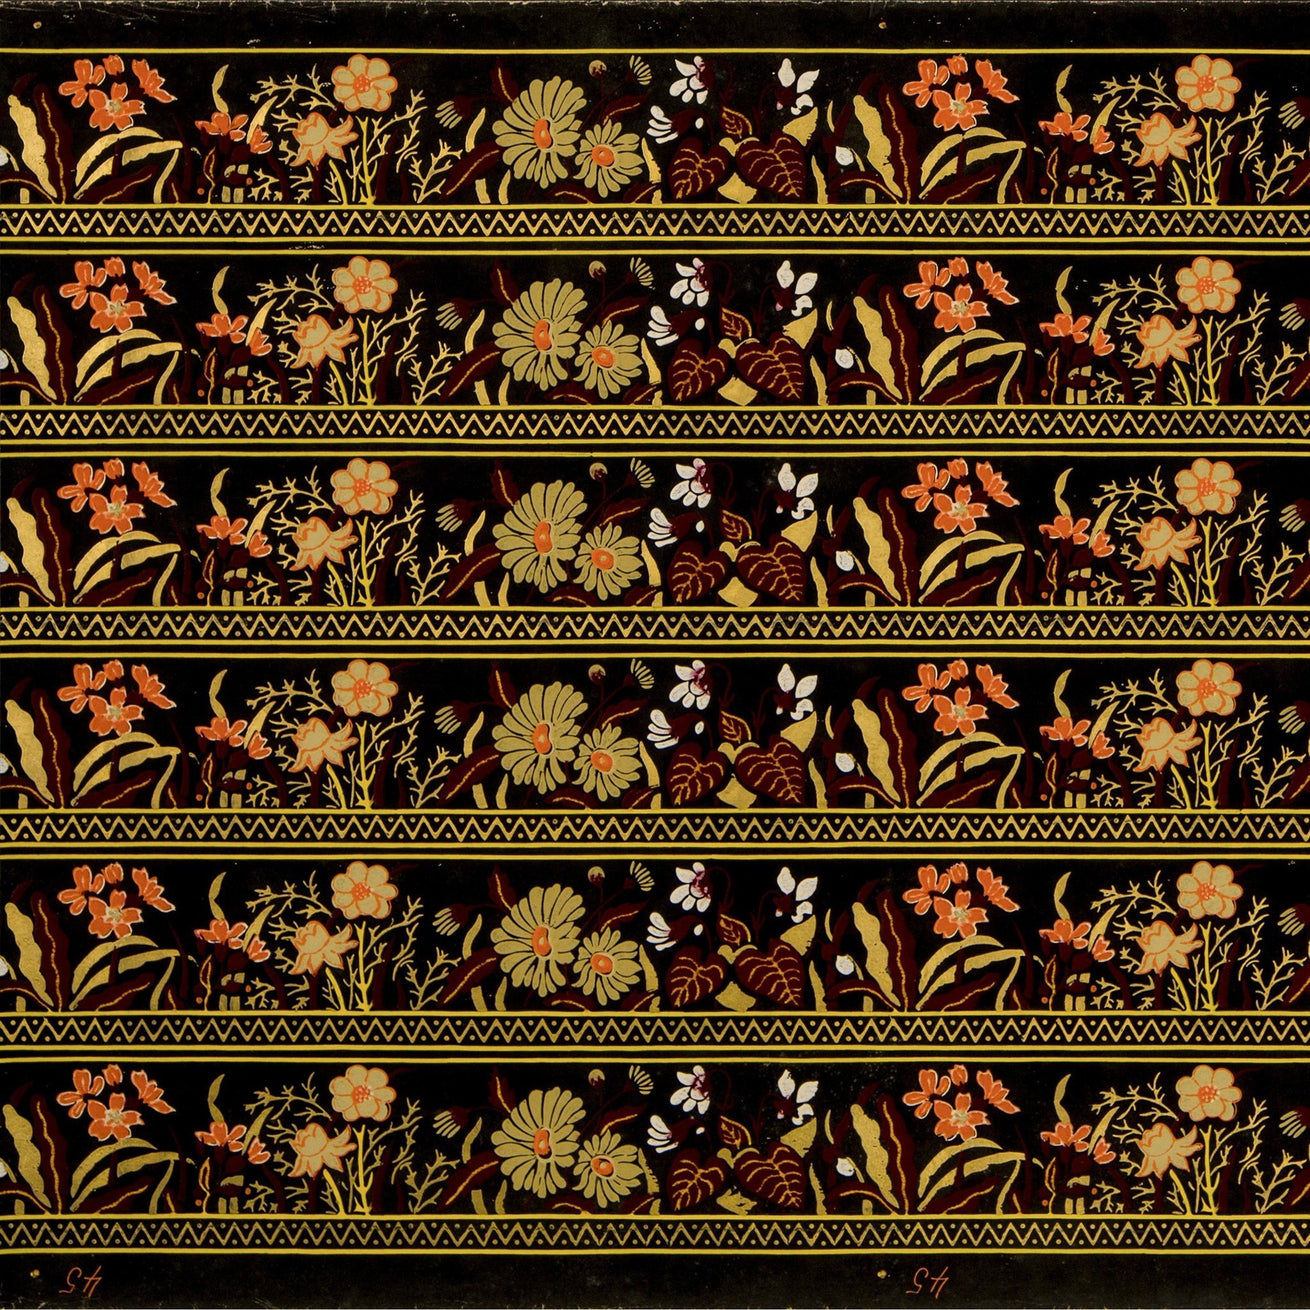 6-Band 3" Stylized Floral Border - Antique Wallpaper Roll